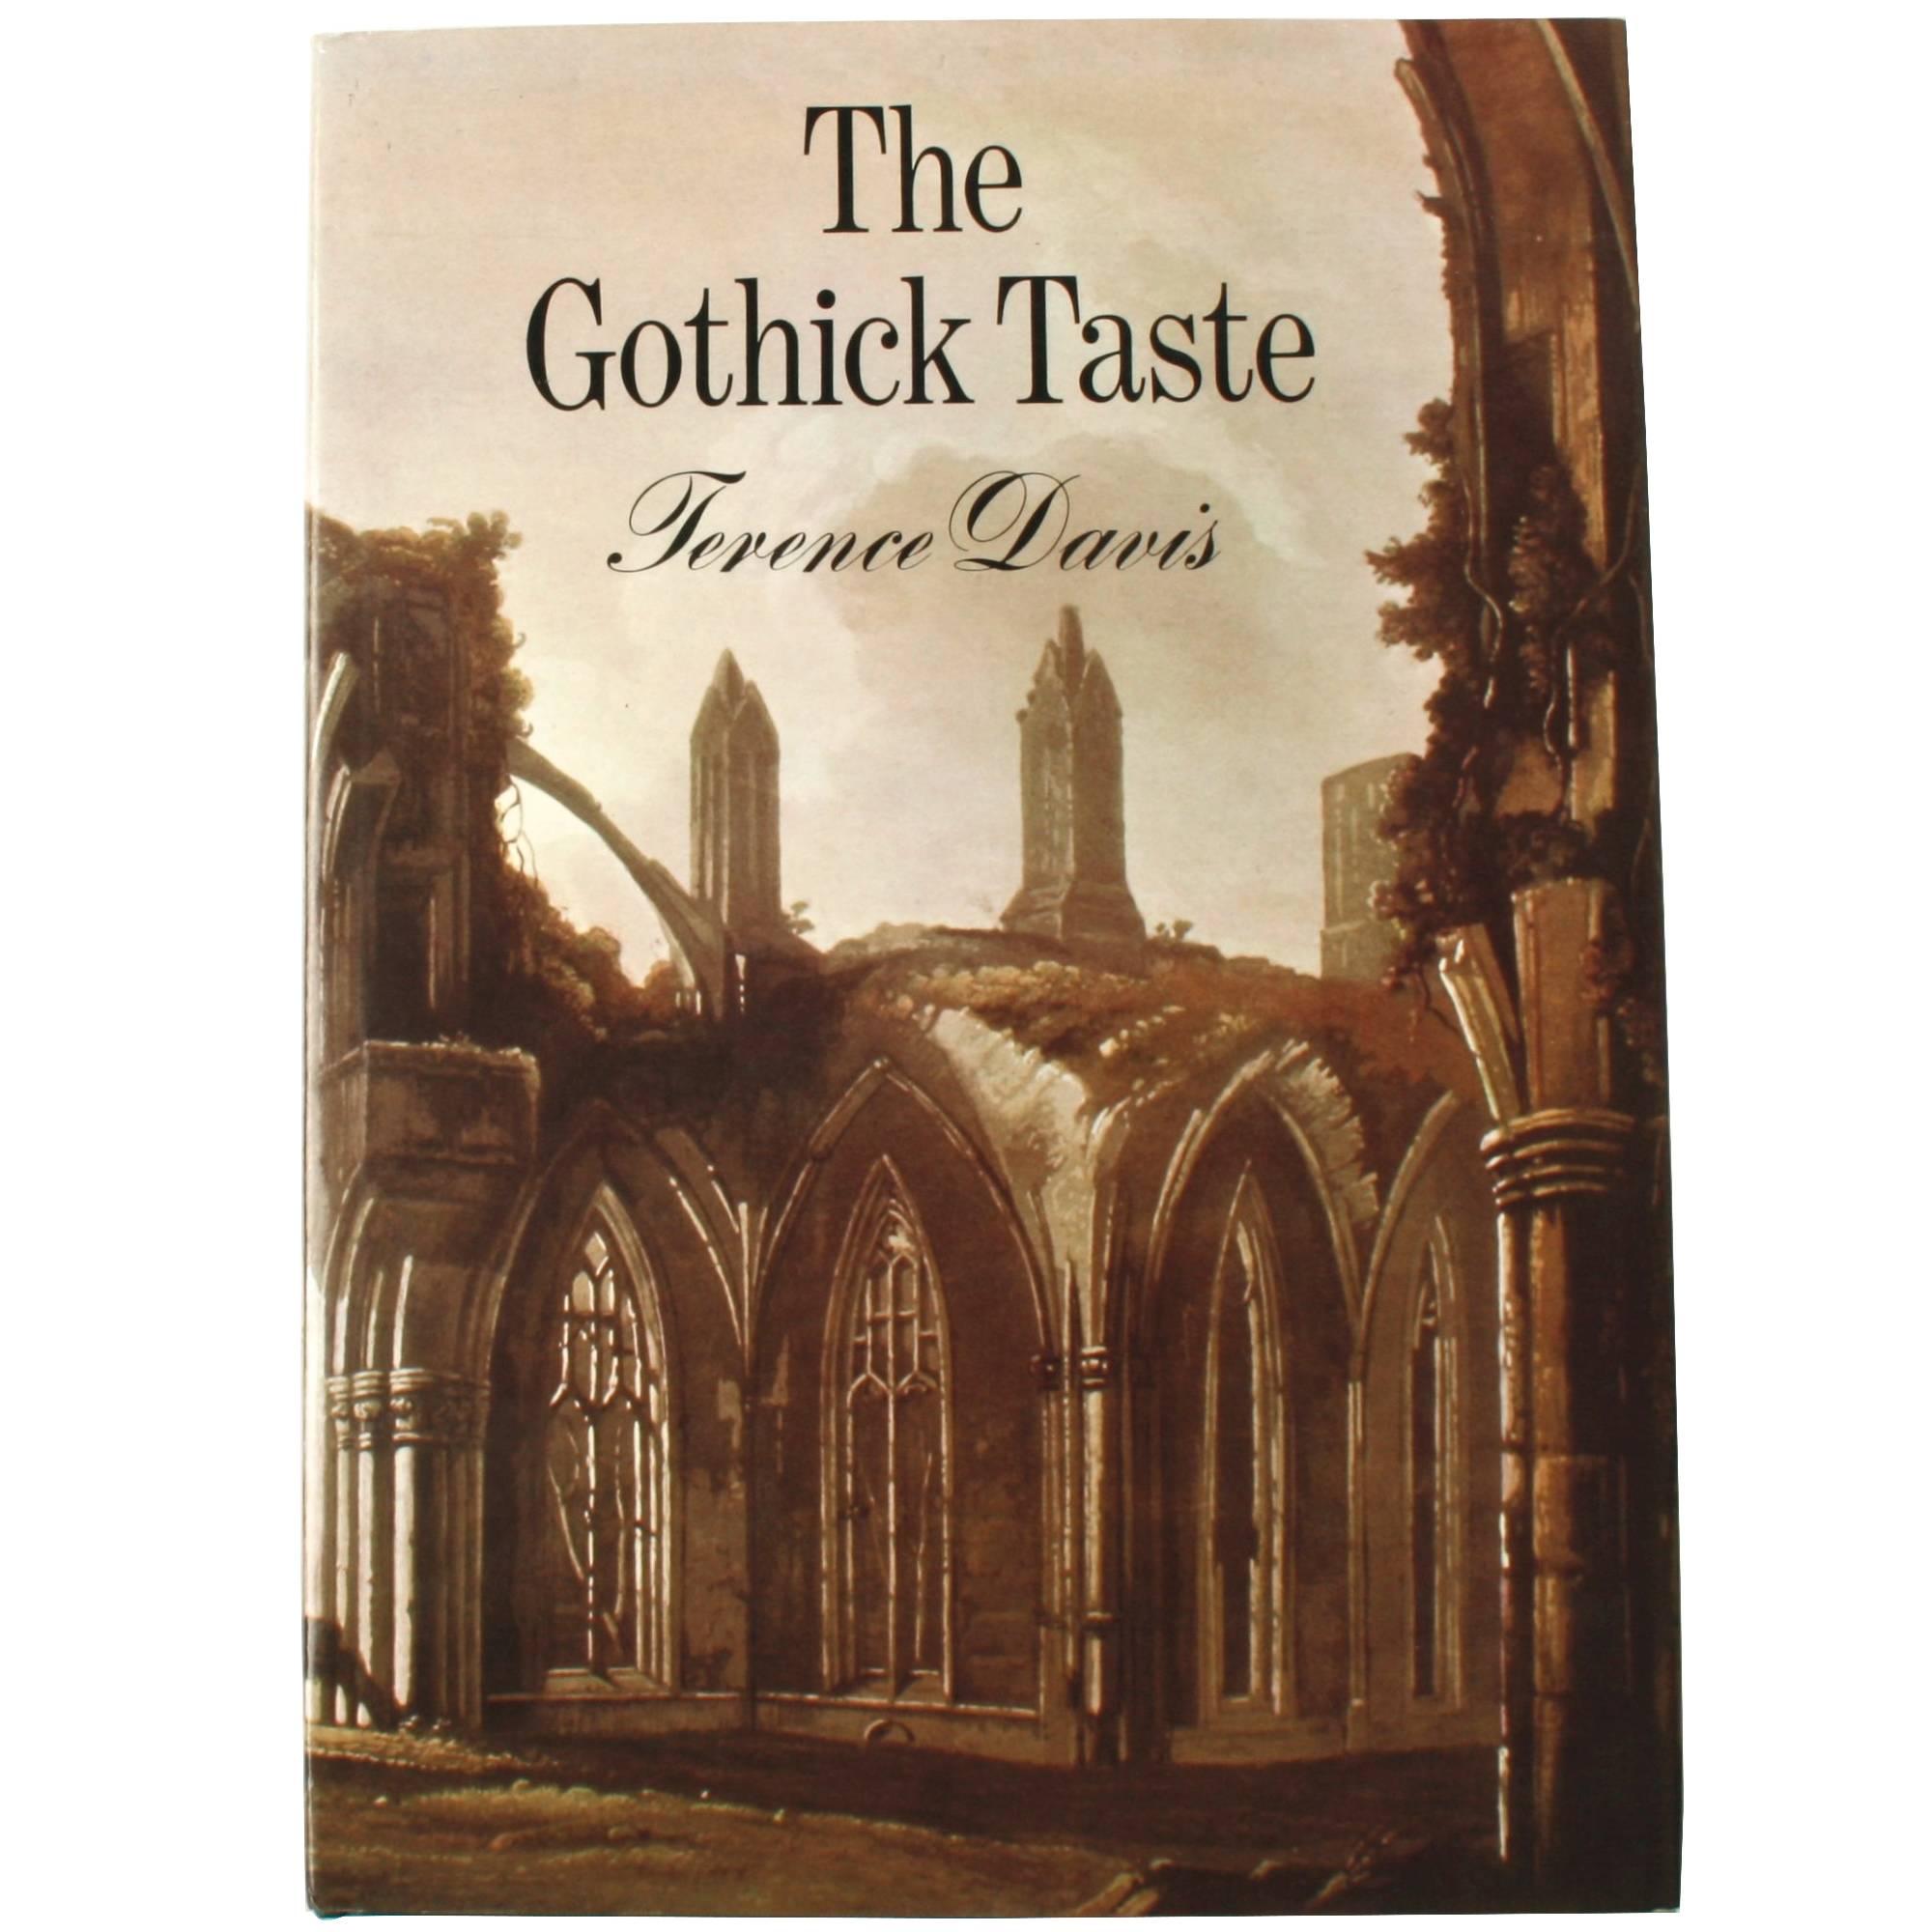 "The Gothic Taste" Book by Terence Davis, First Edition